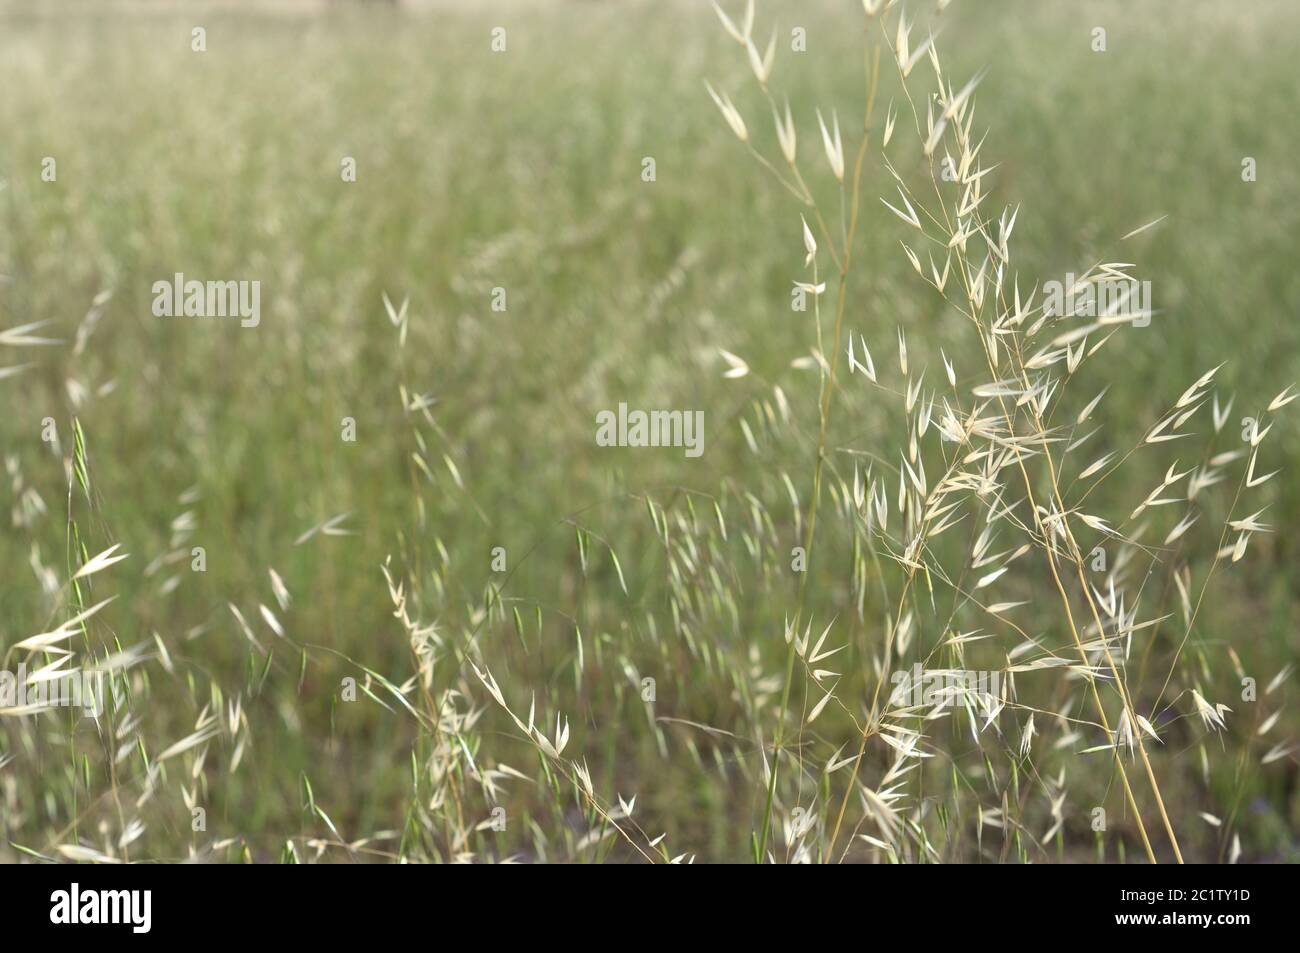 Avena sativa for backgrounds and education Stock Photo